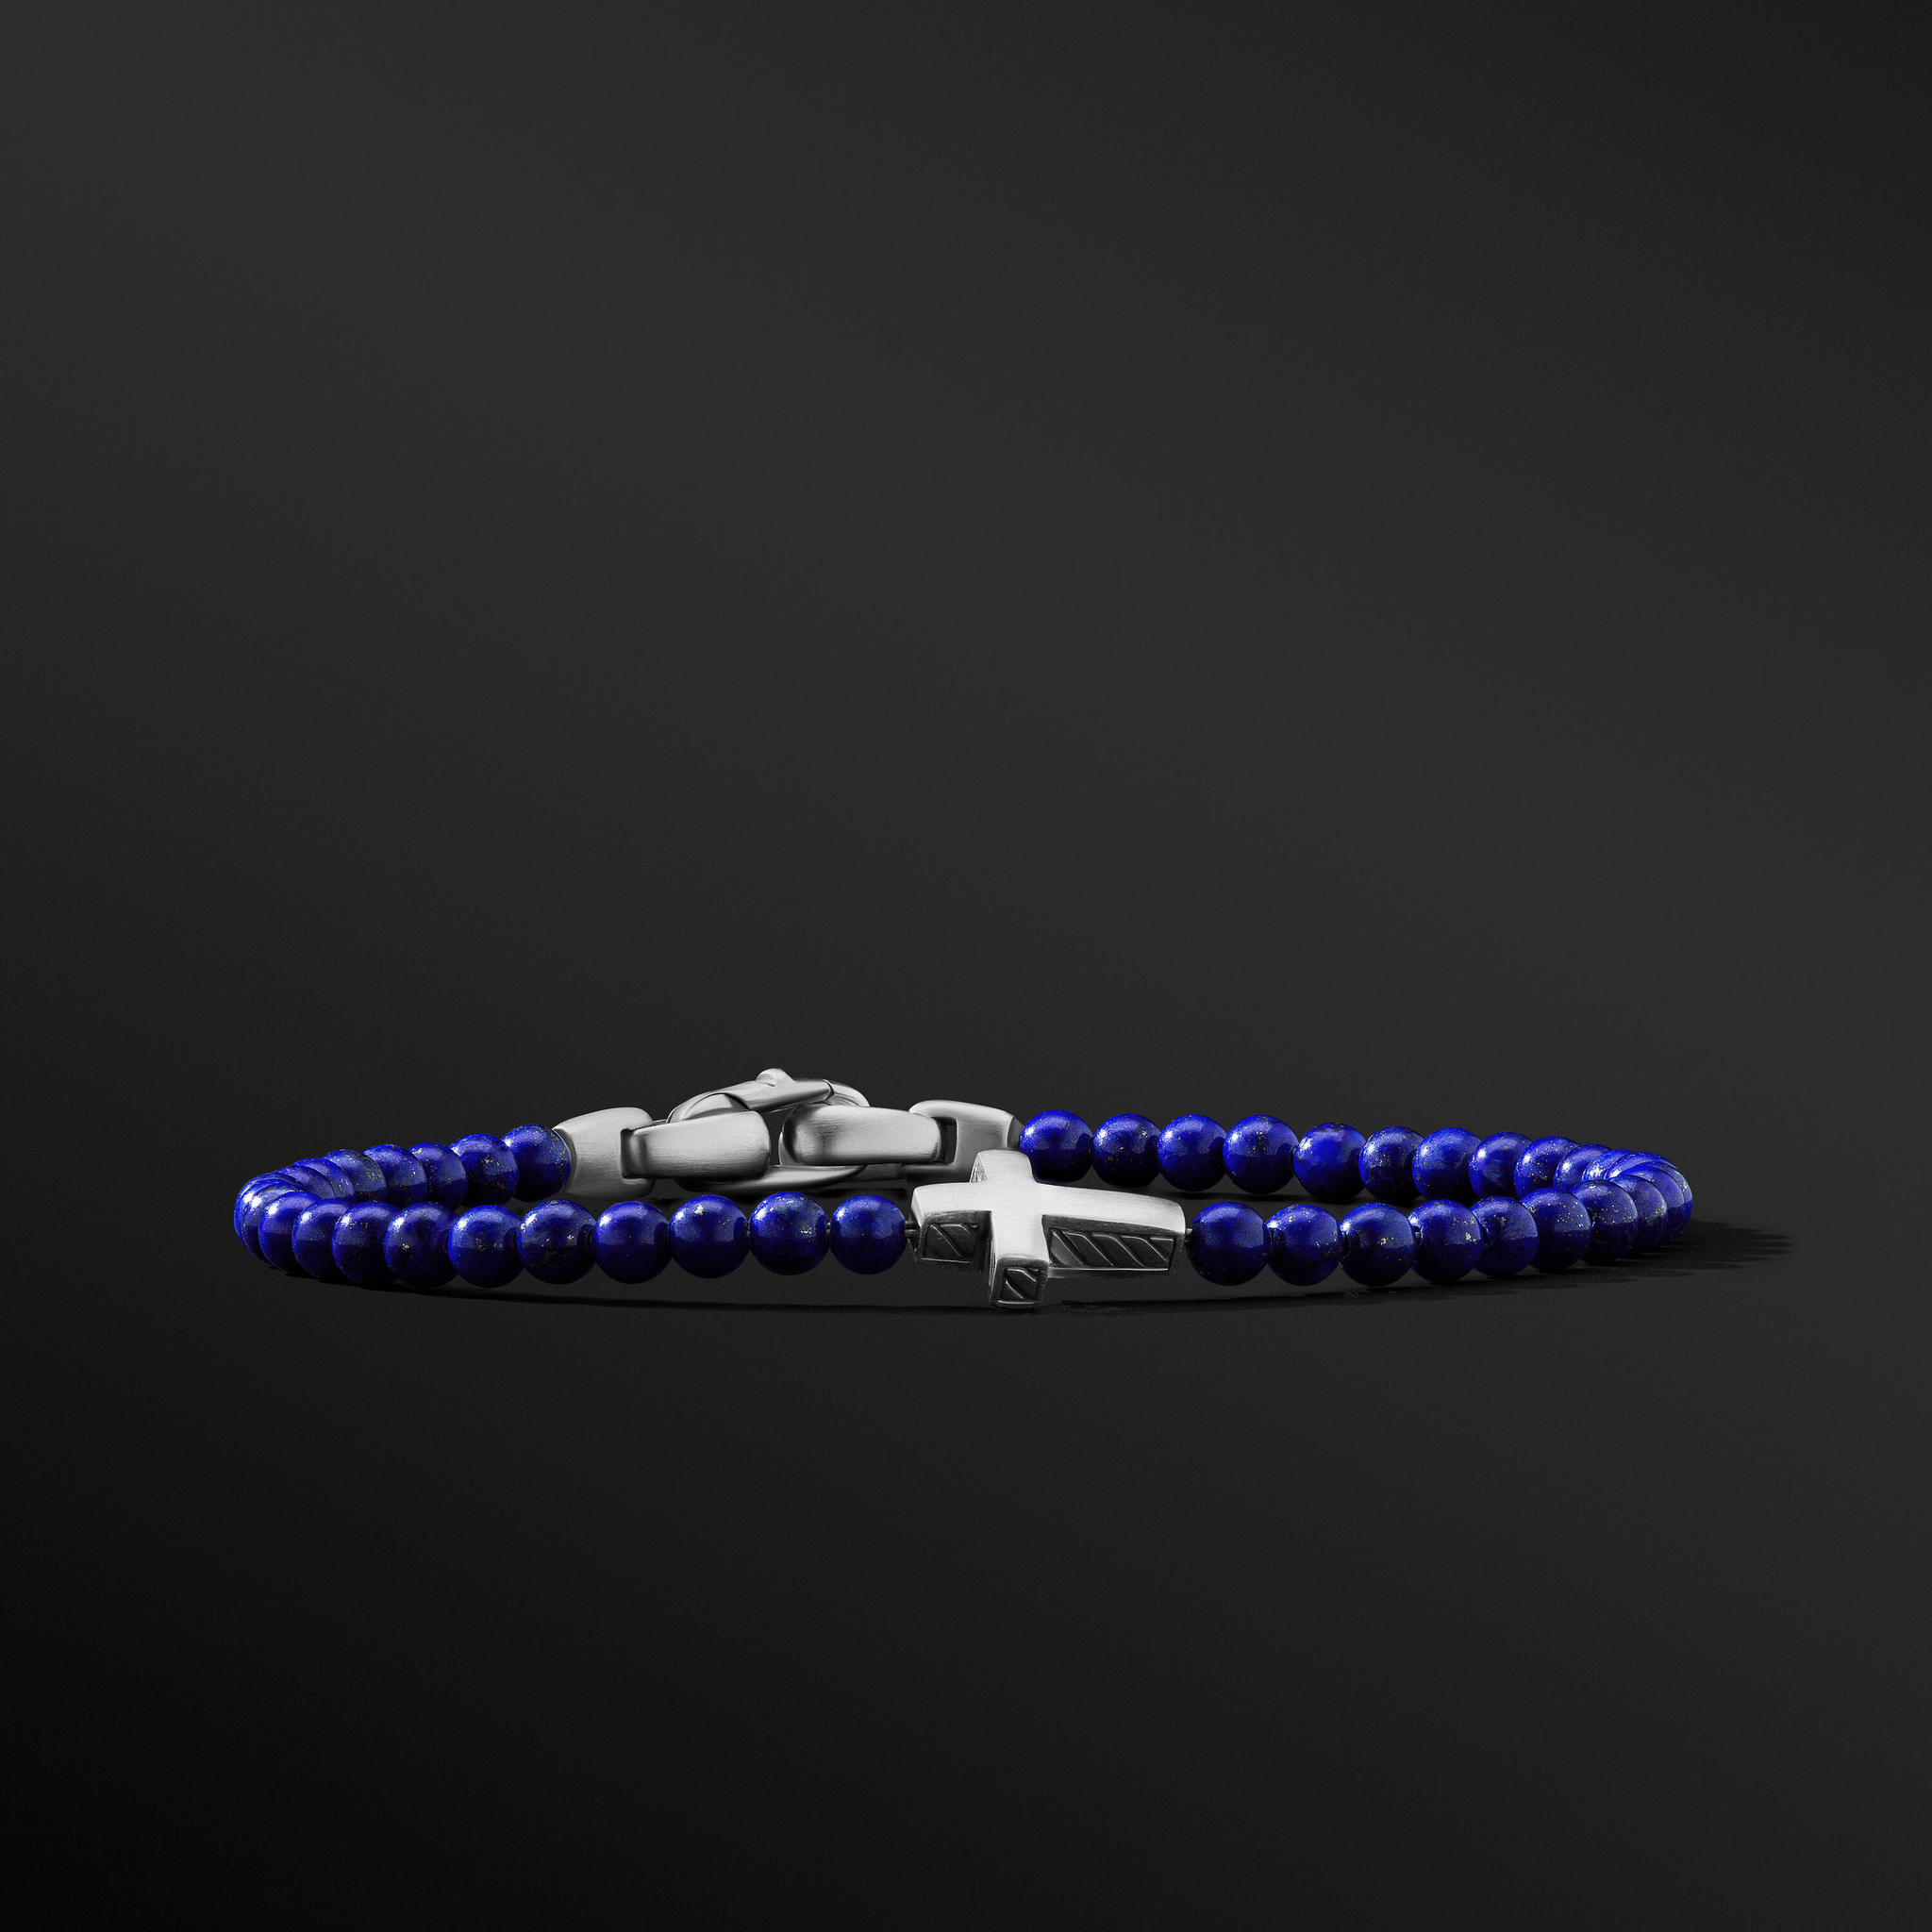 Spiritual Beads Cross Station Bracelet in Sterling Silver with Lapis